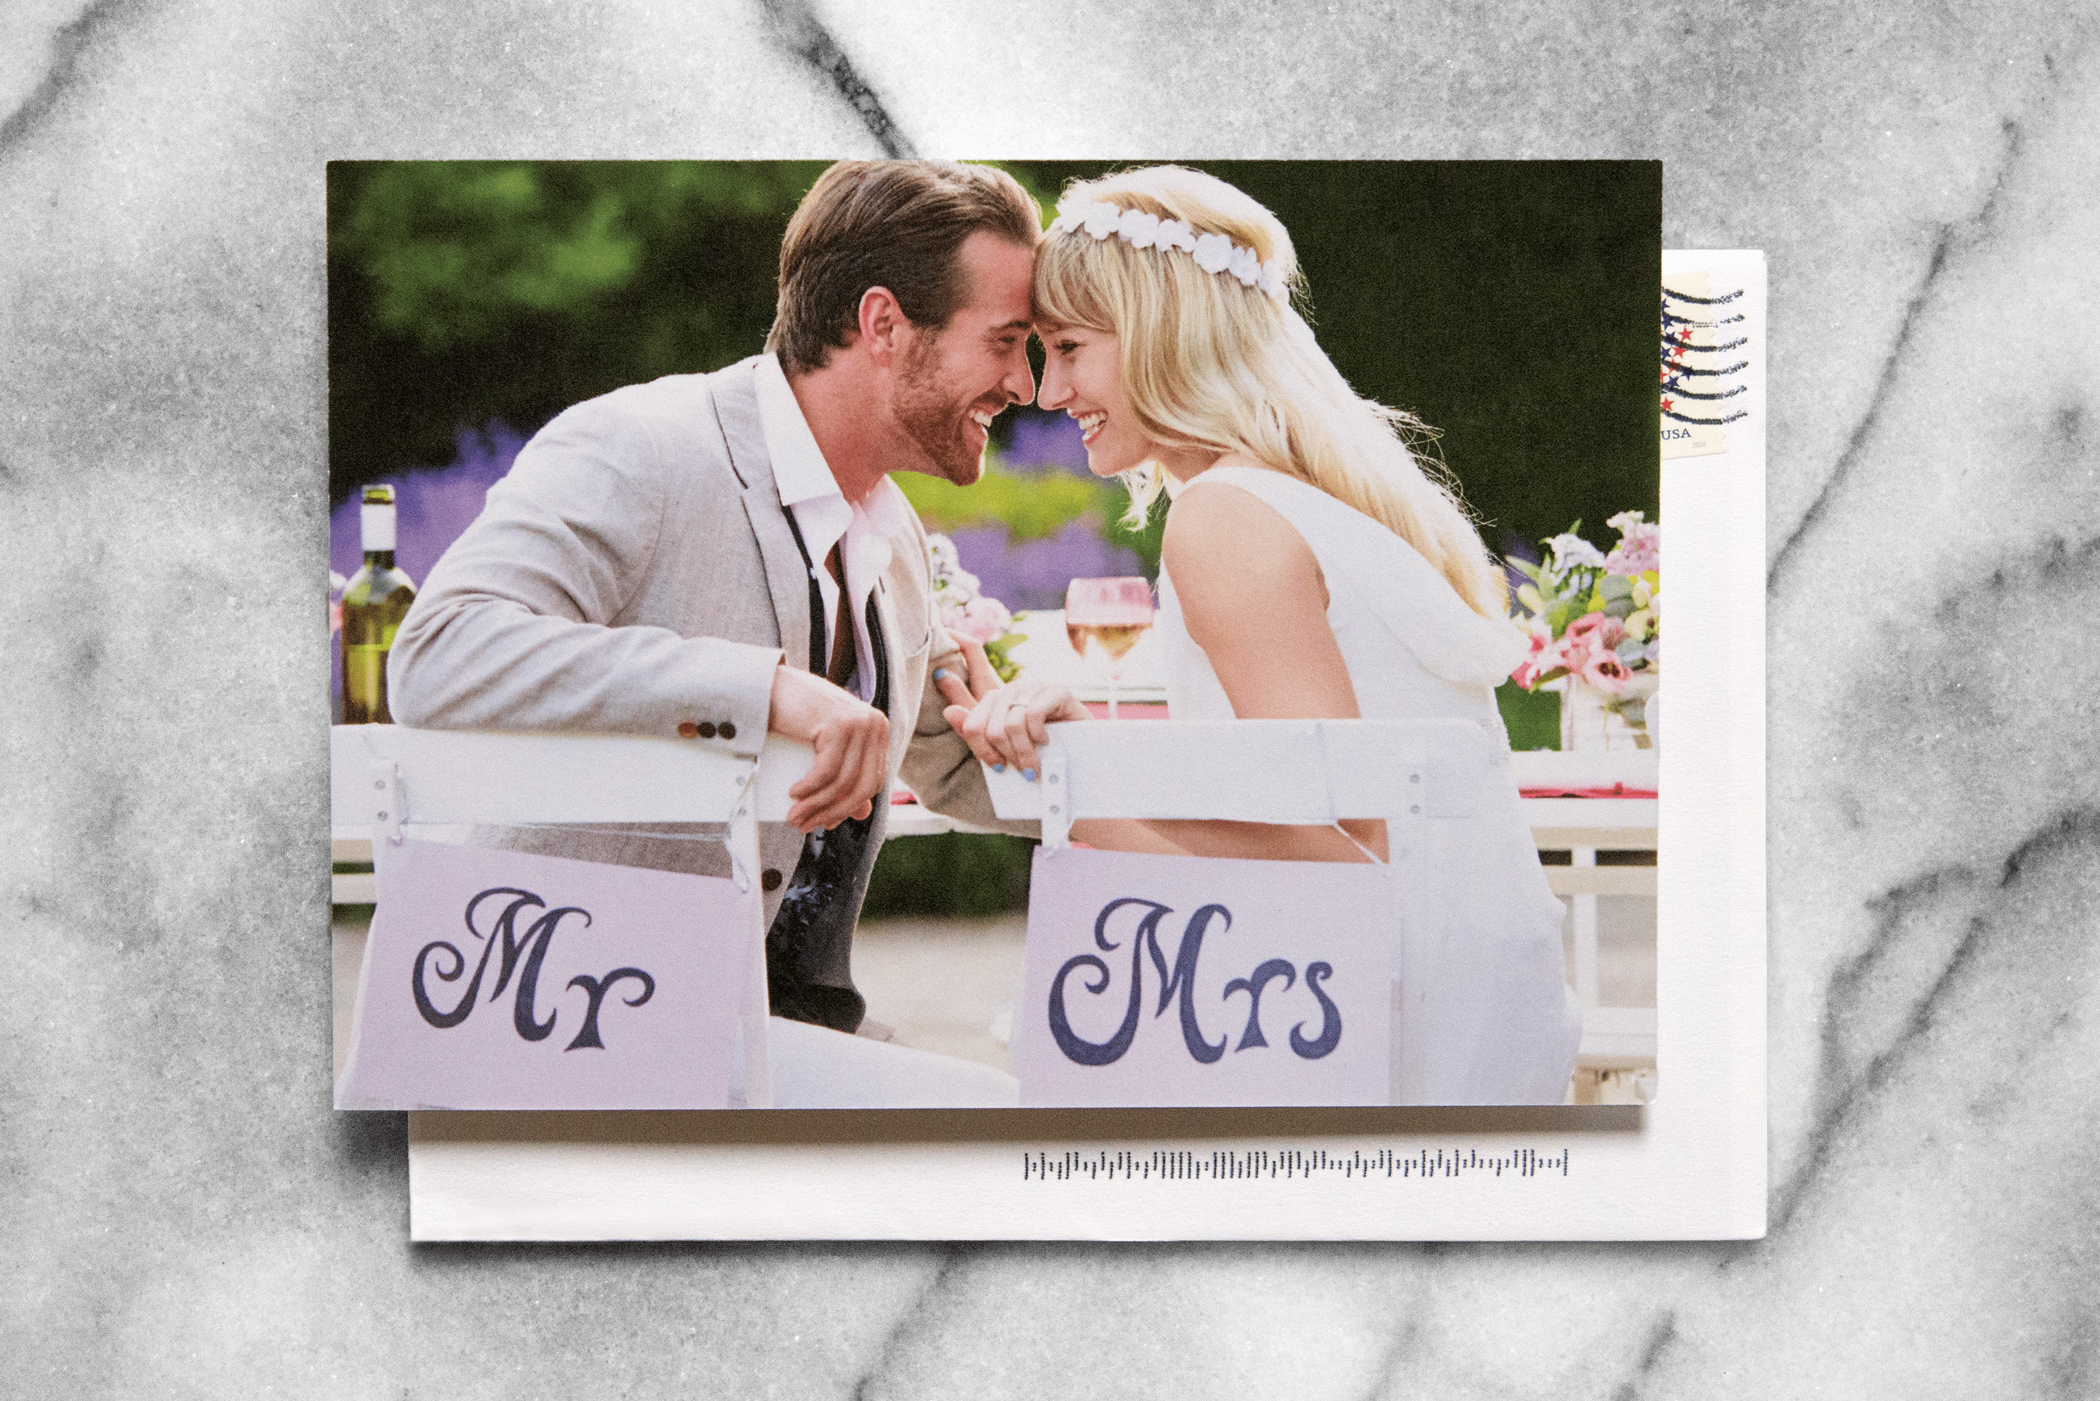 Personalize your wedding correspondence with Bond.co